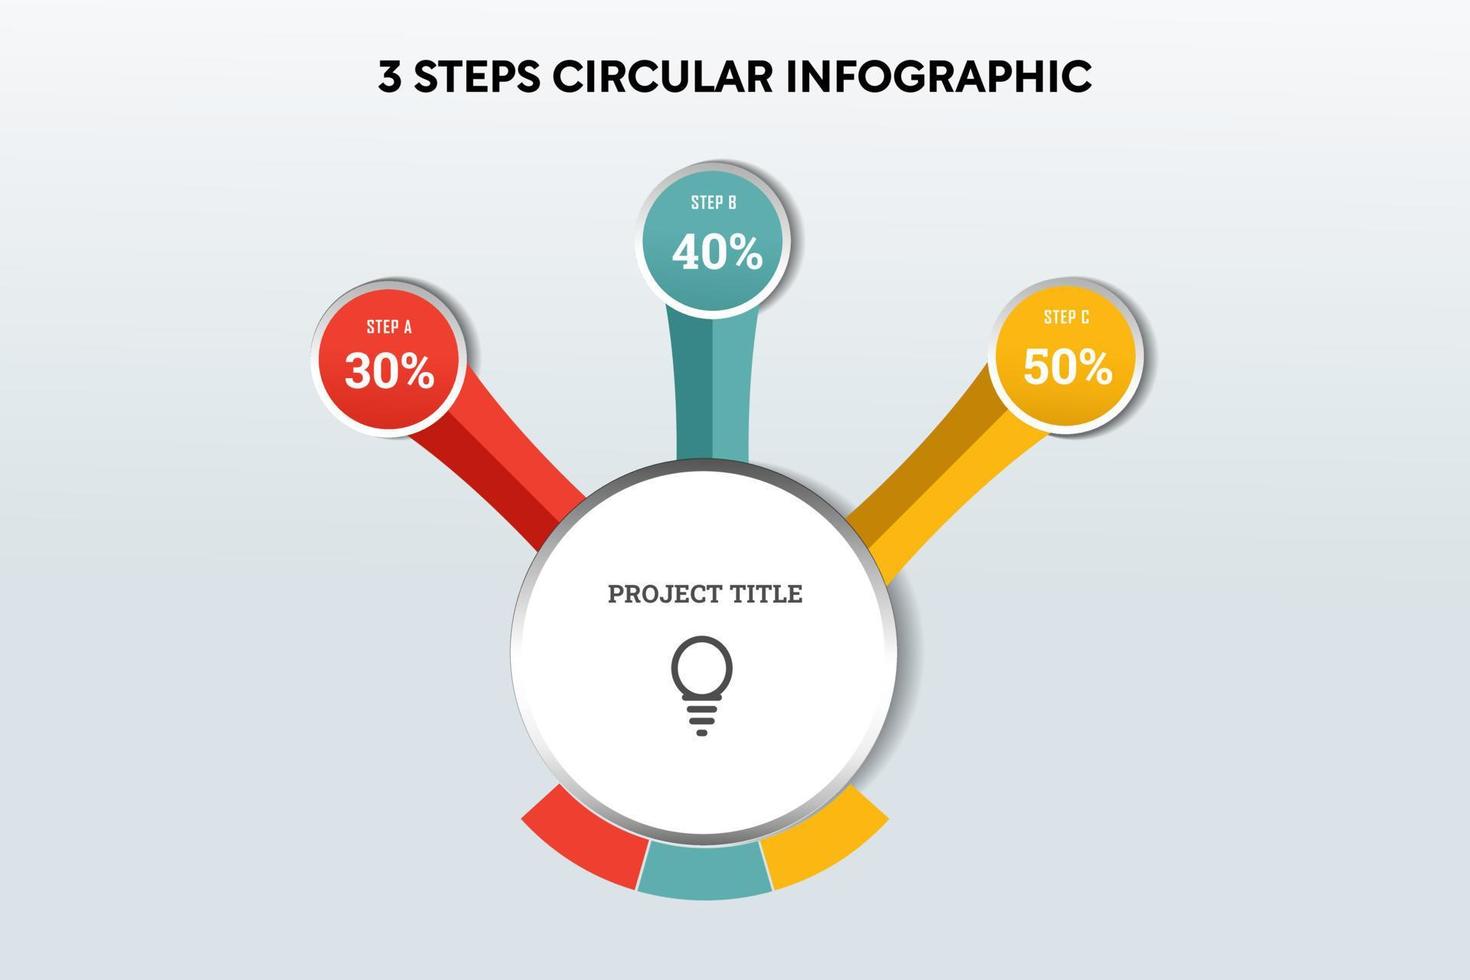 3 stappen circulaire infographic vector